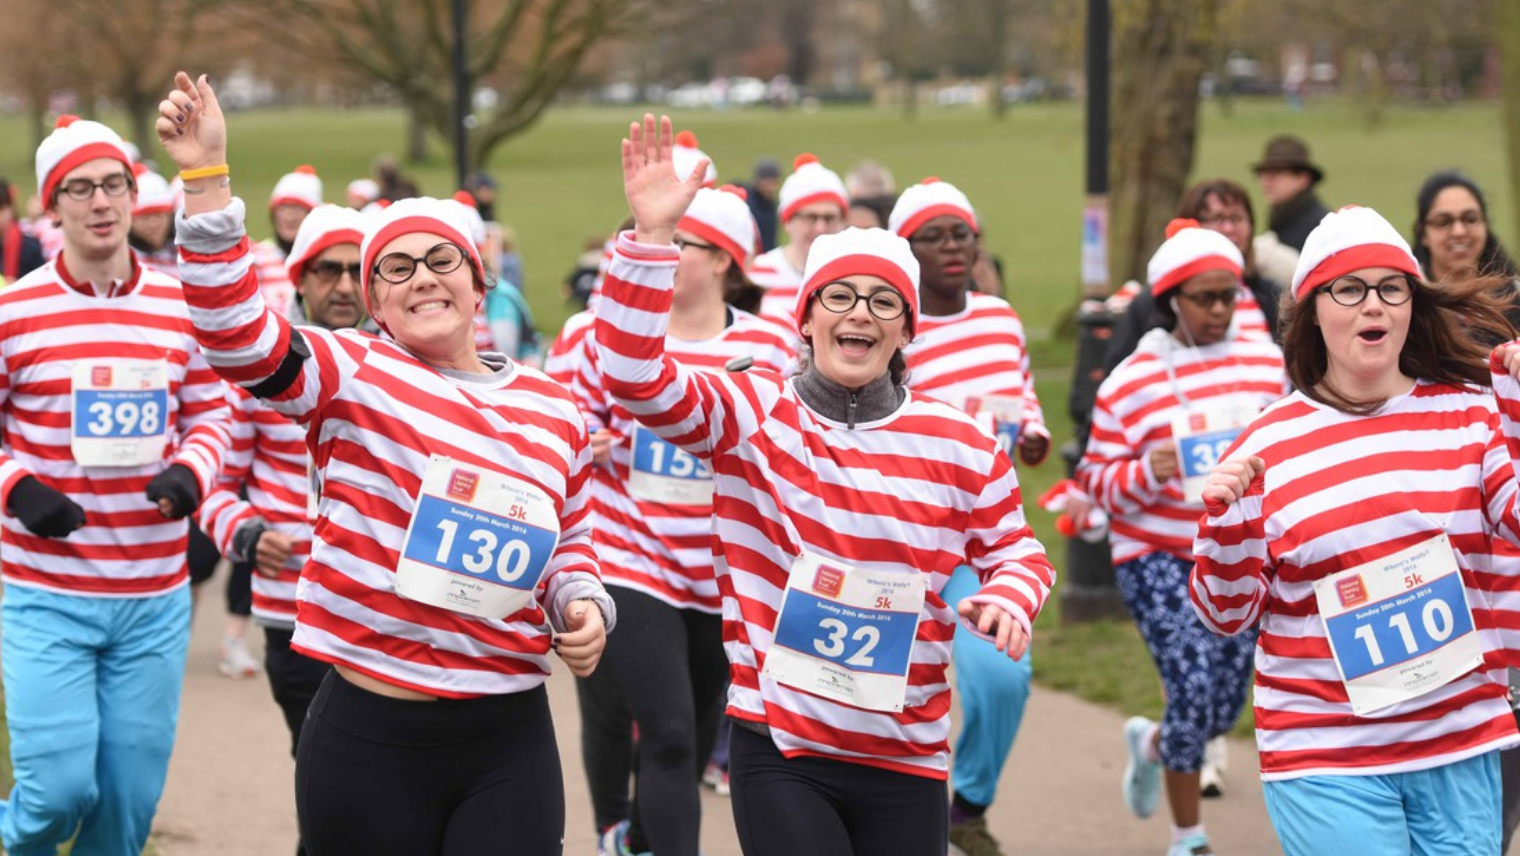 Runners dressed as Wally from "Where's Wally" for a fun run